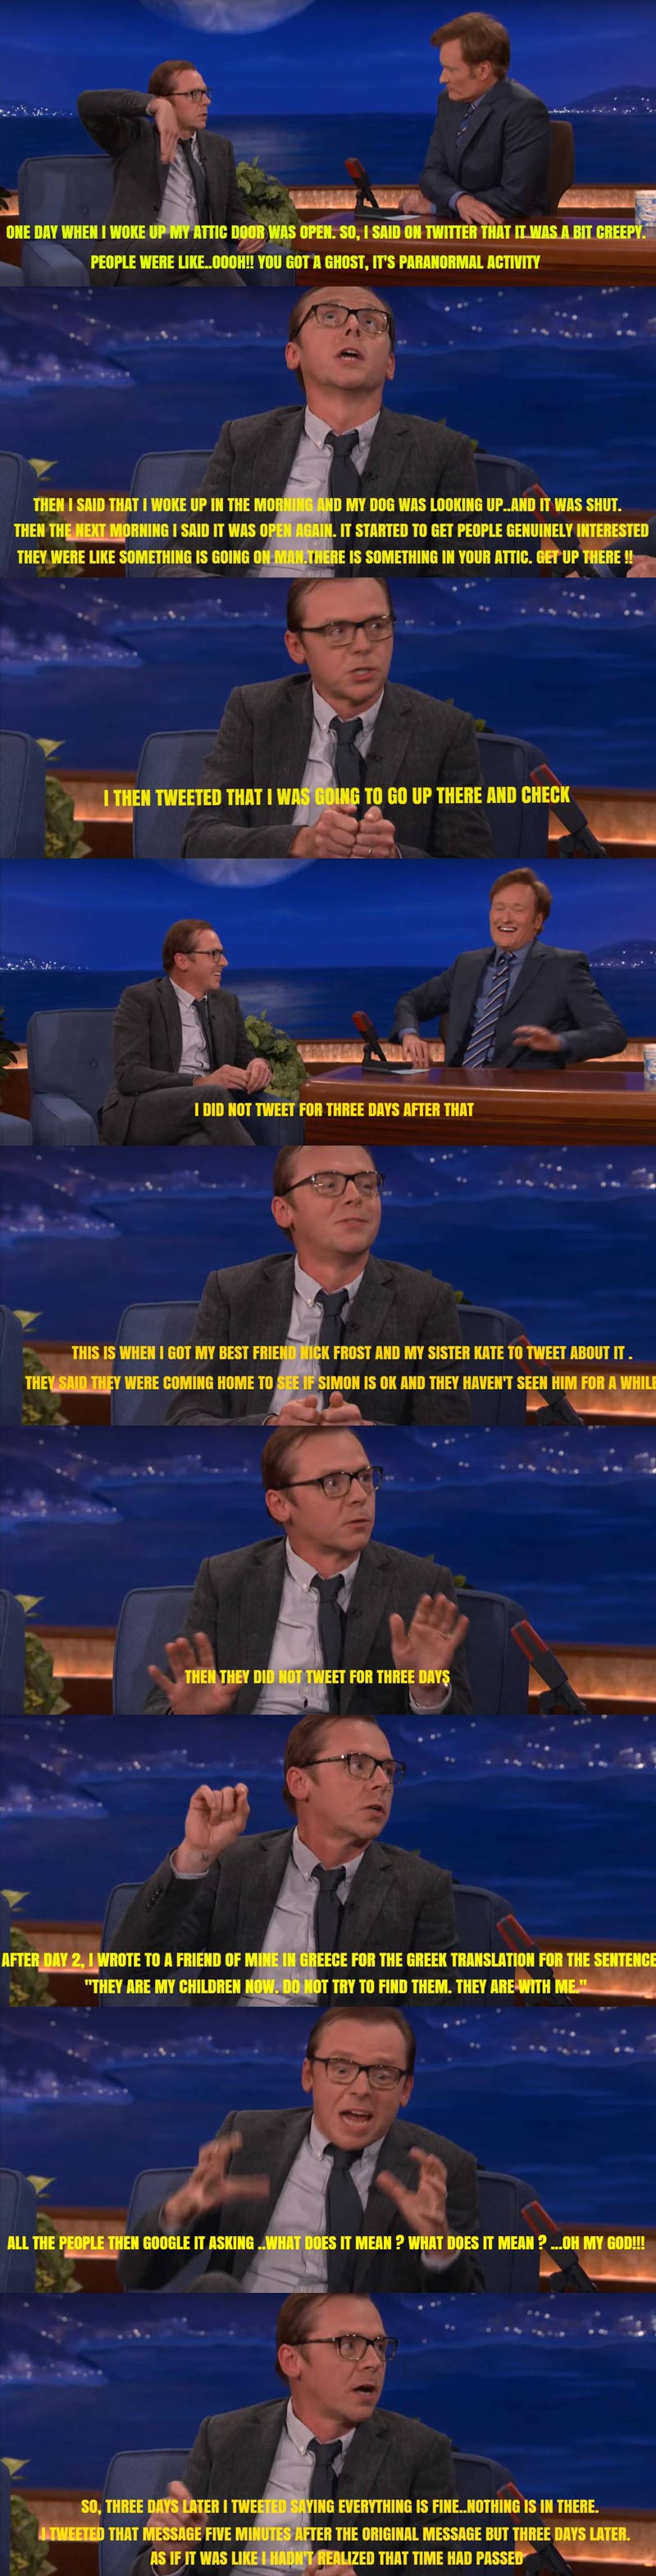 Simon Pegg on how to properly use twitter